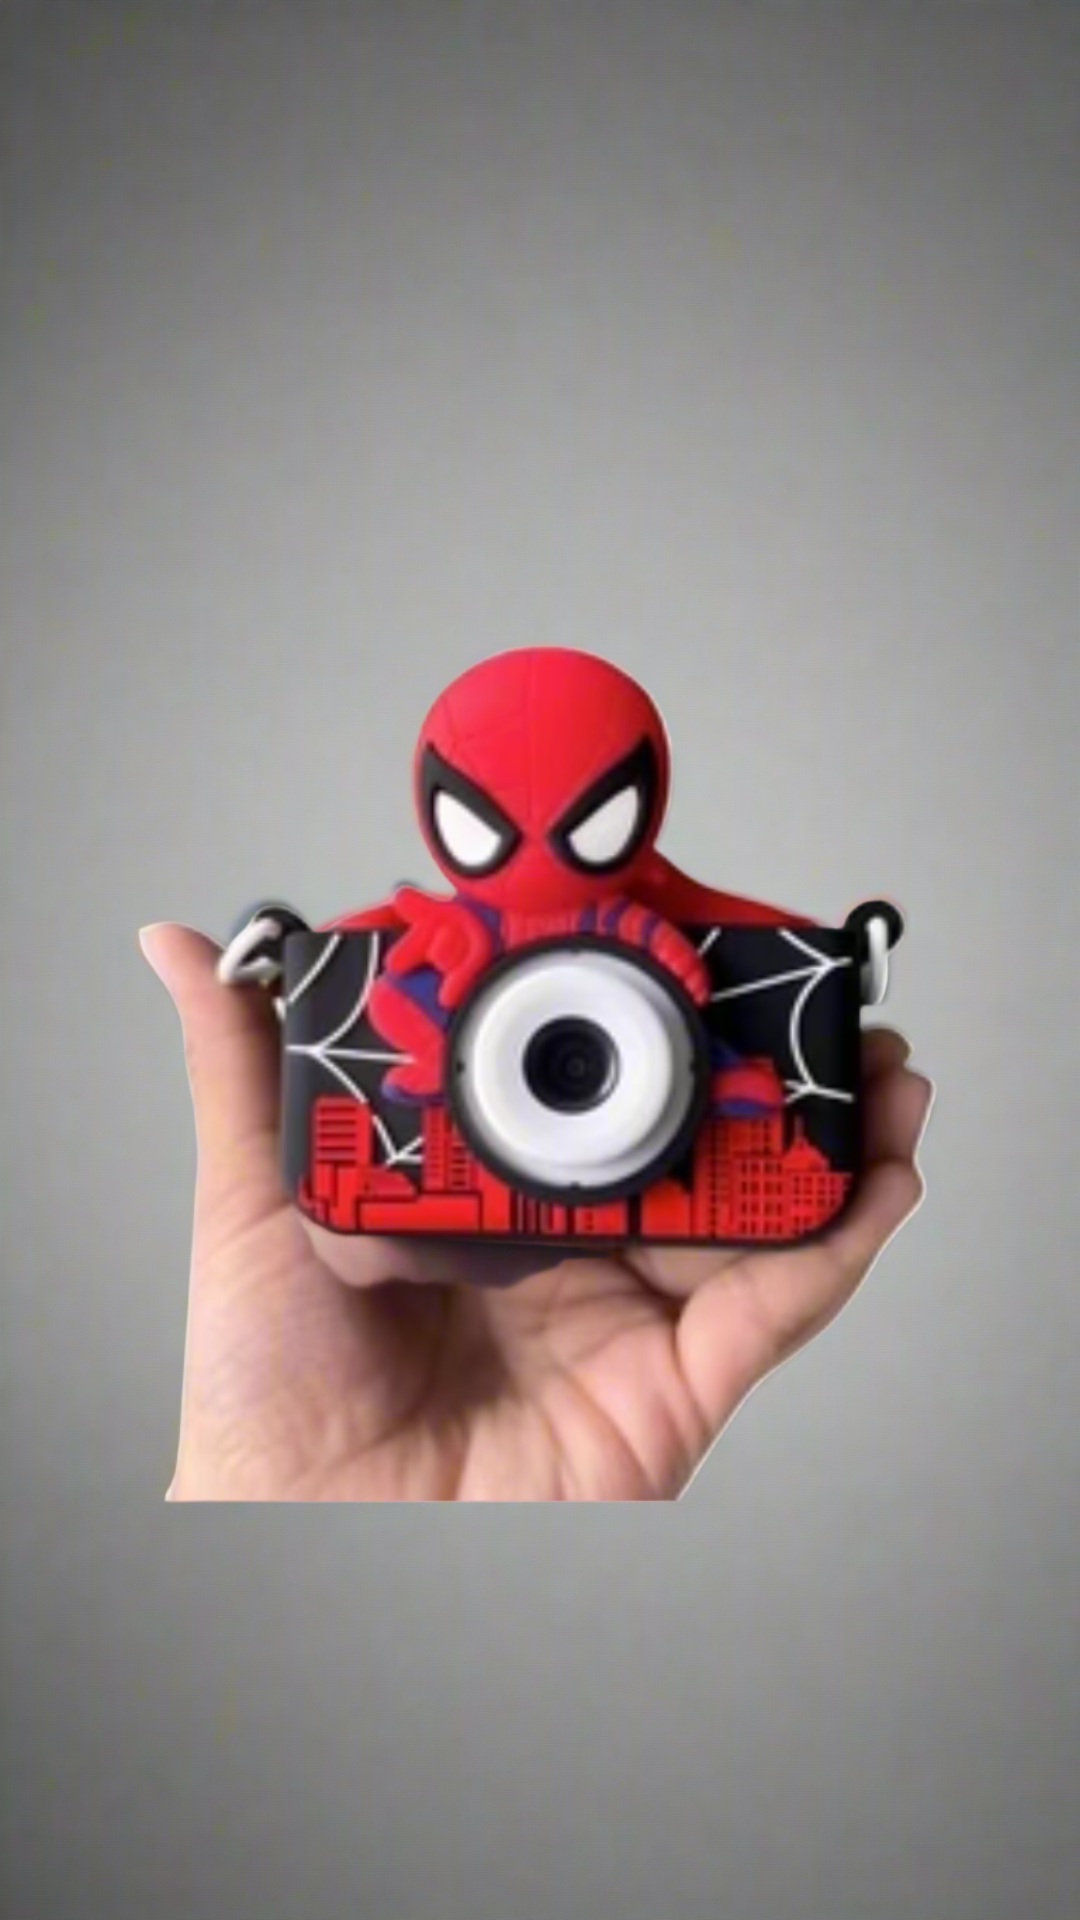 Rainbow Toys Spiderman-Themed Electronic Camera for Kids with Selfie Camera